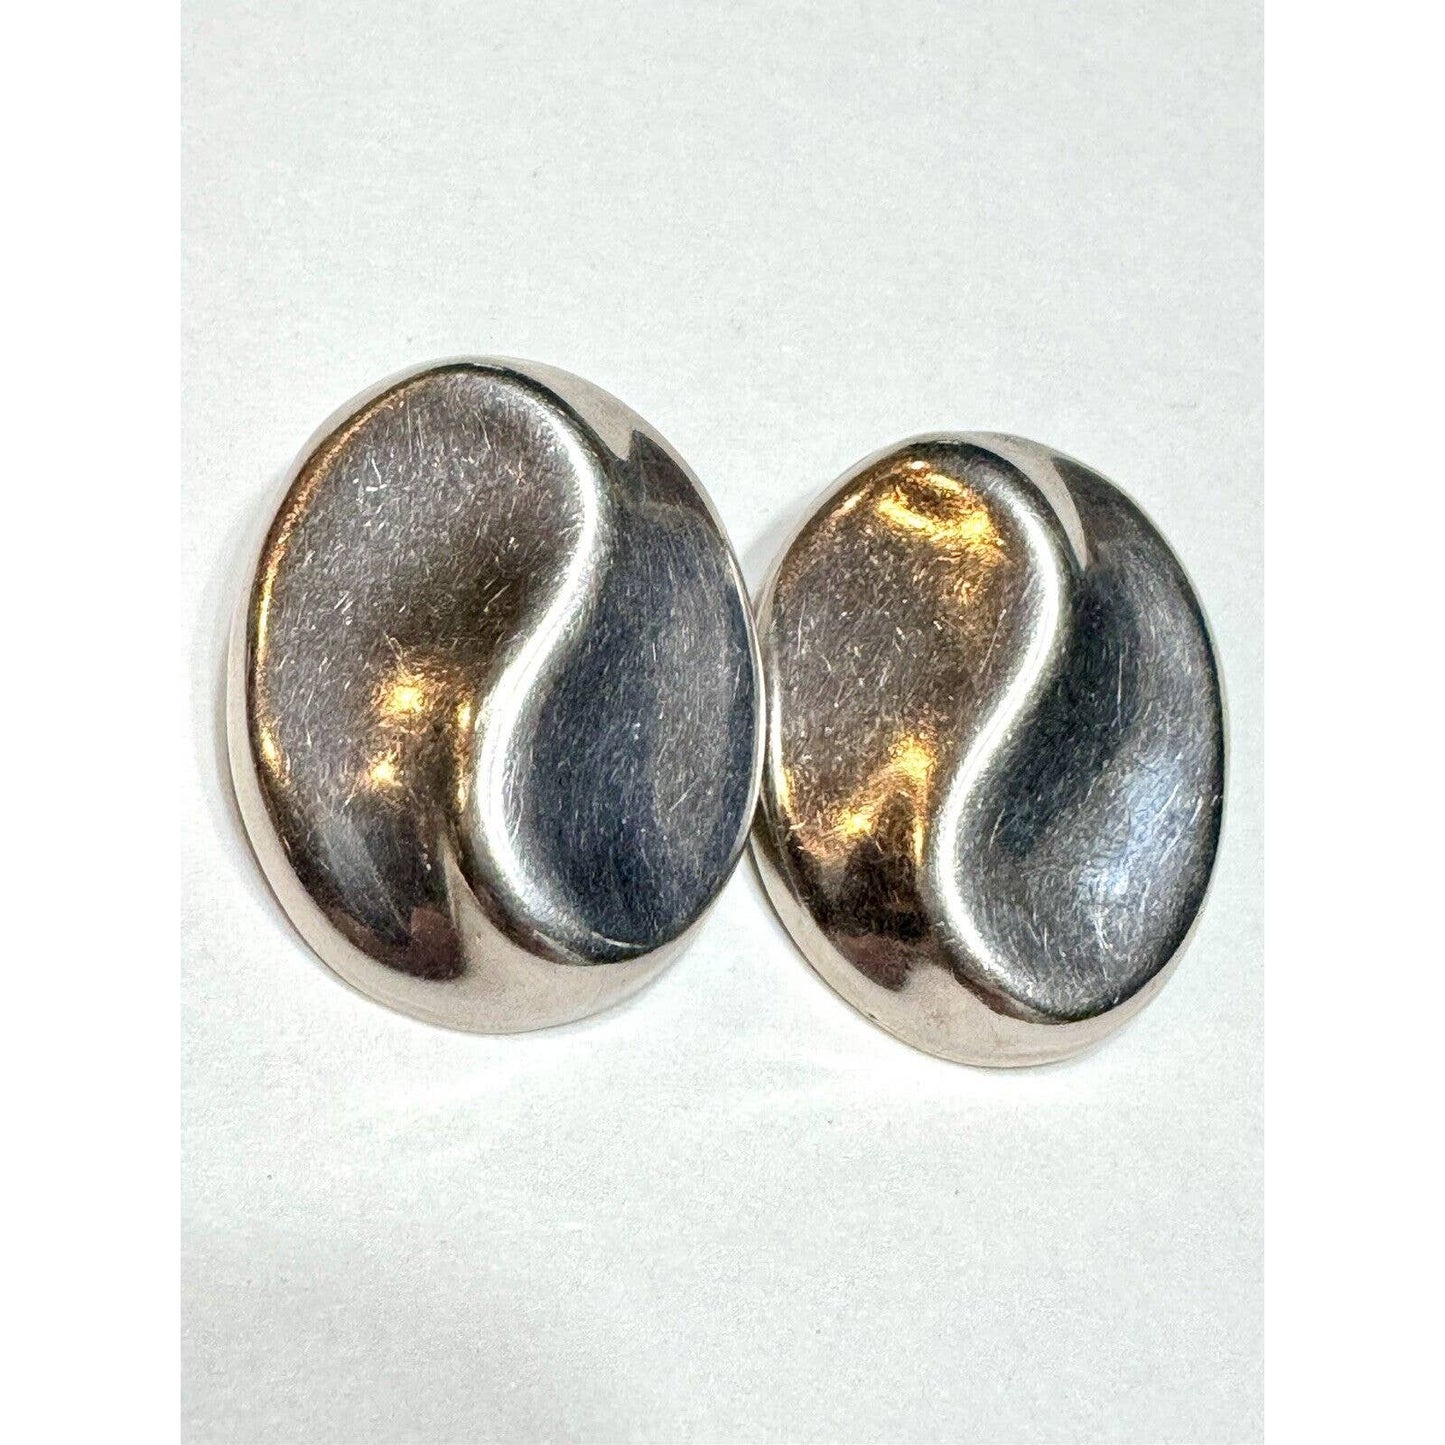 Unbranded925 Silver (Sterling) Earrings Retro Mexico TD-56 Clip On Yin Yang Swirl Style - Black Dog Vintage